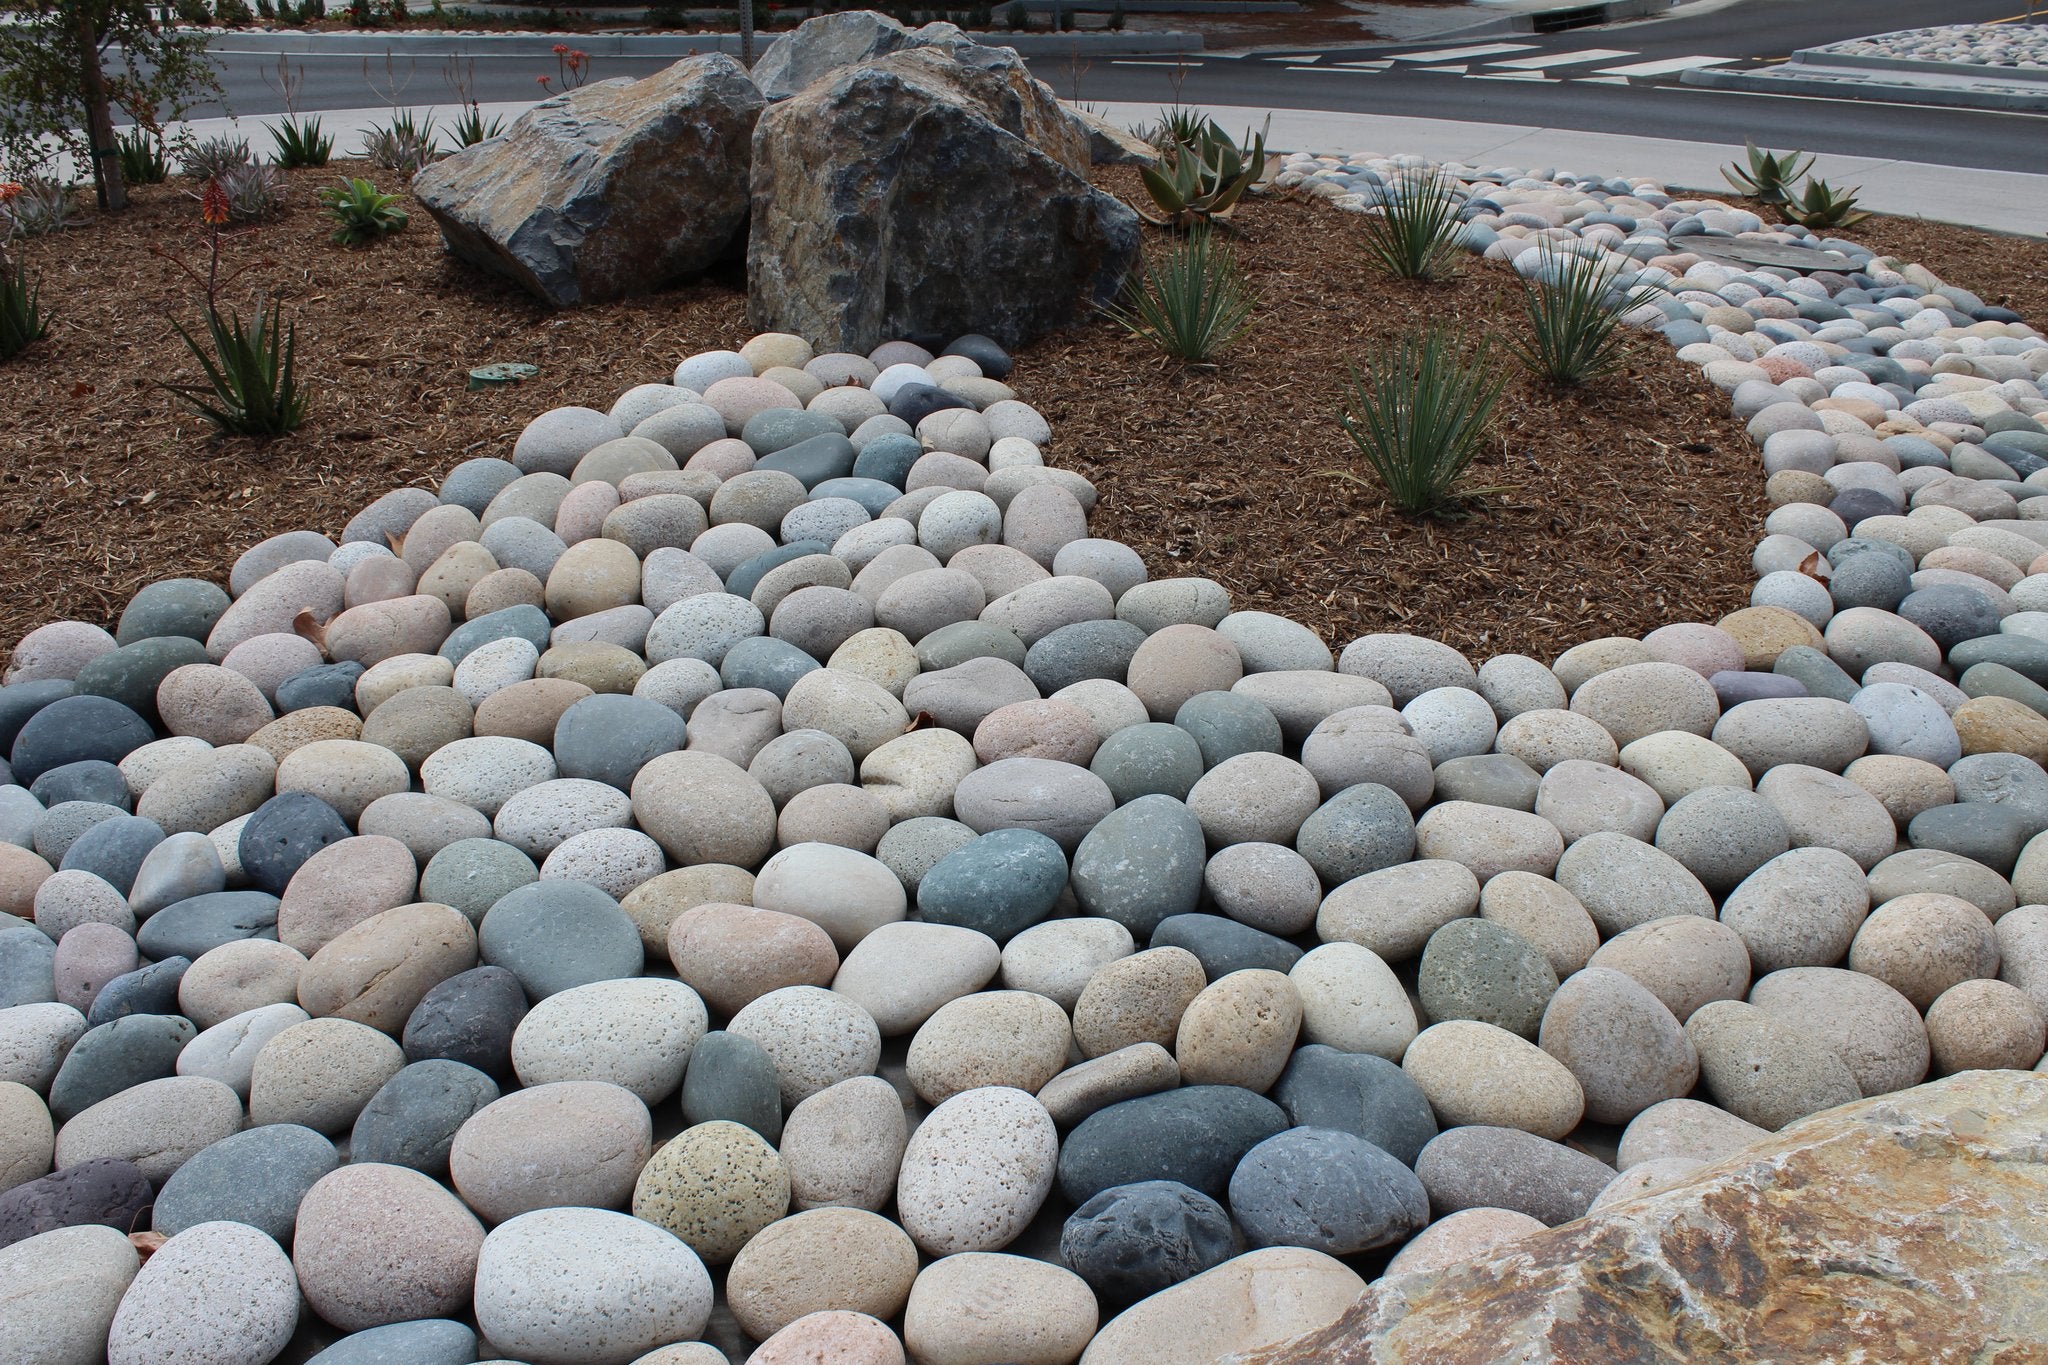 Arizona River Rock or Beach Pebbles - Landscaping Stone Products